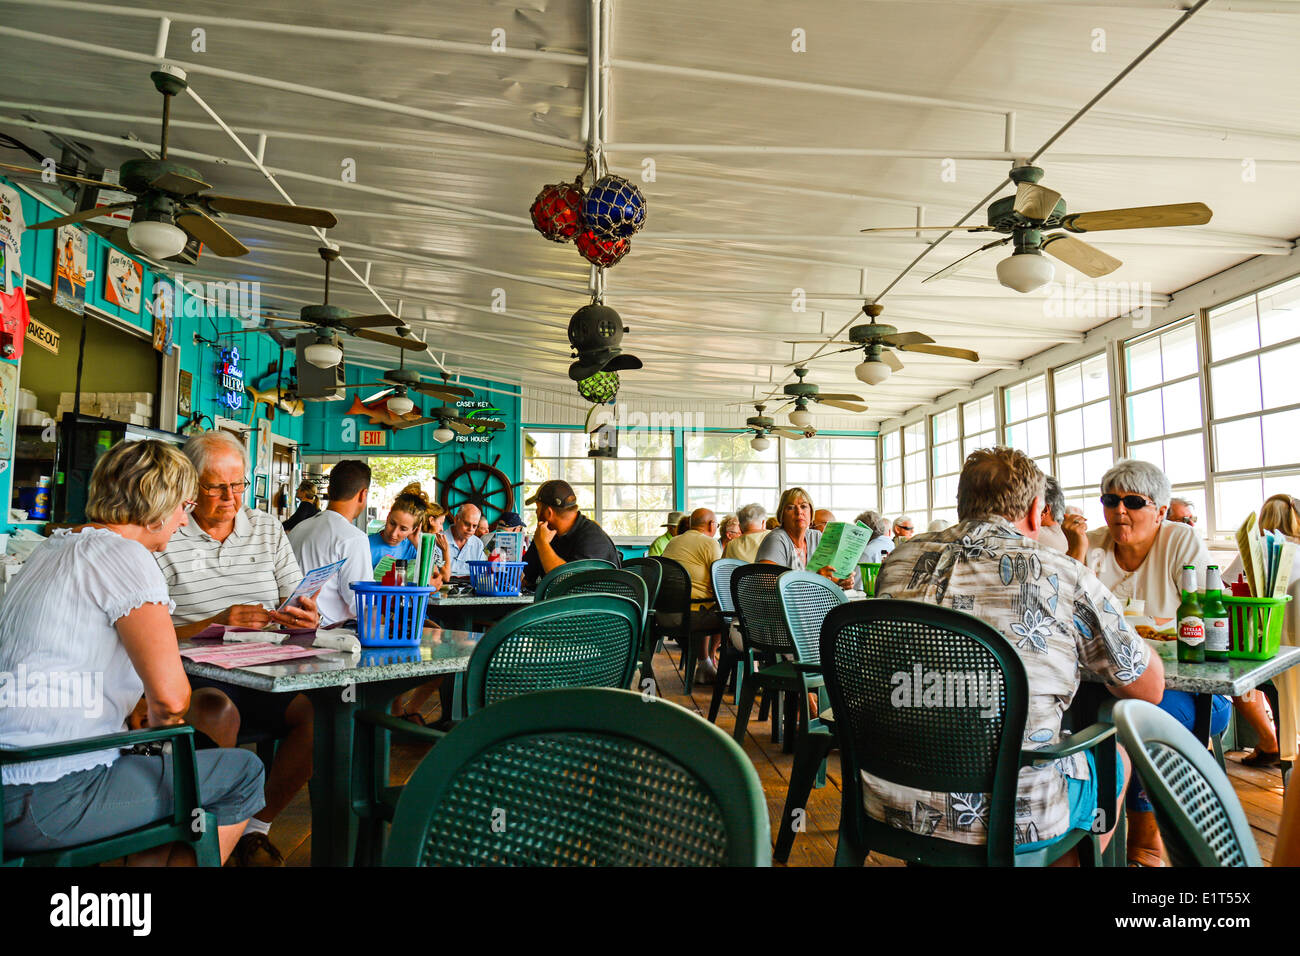 Patrons enjoying lunch at the waterfront themed Casey Key Fish House restaurant on the Gulf of Mexico, Casey Key, FL, USA Stock Photo